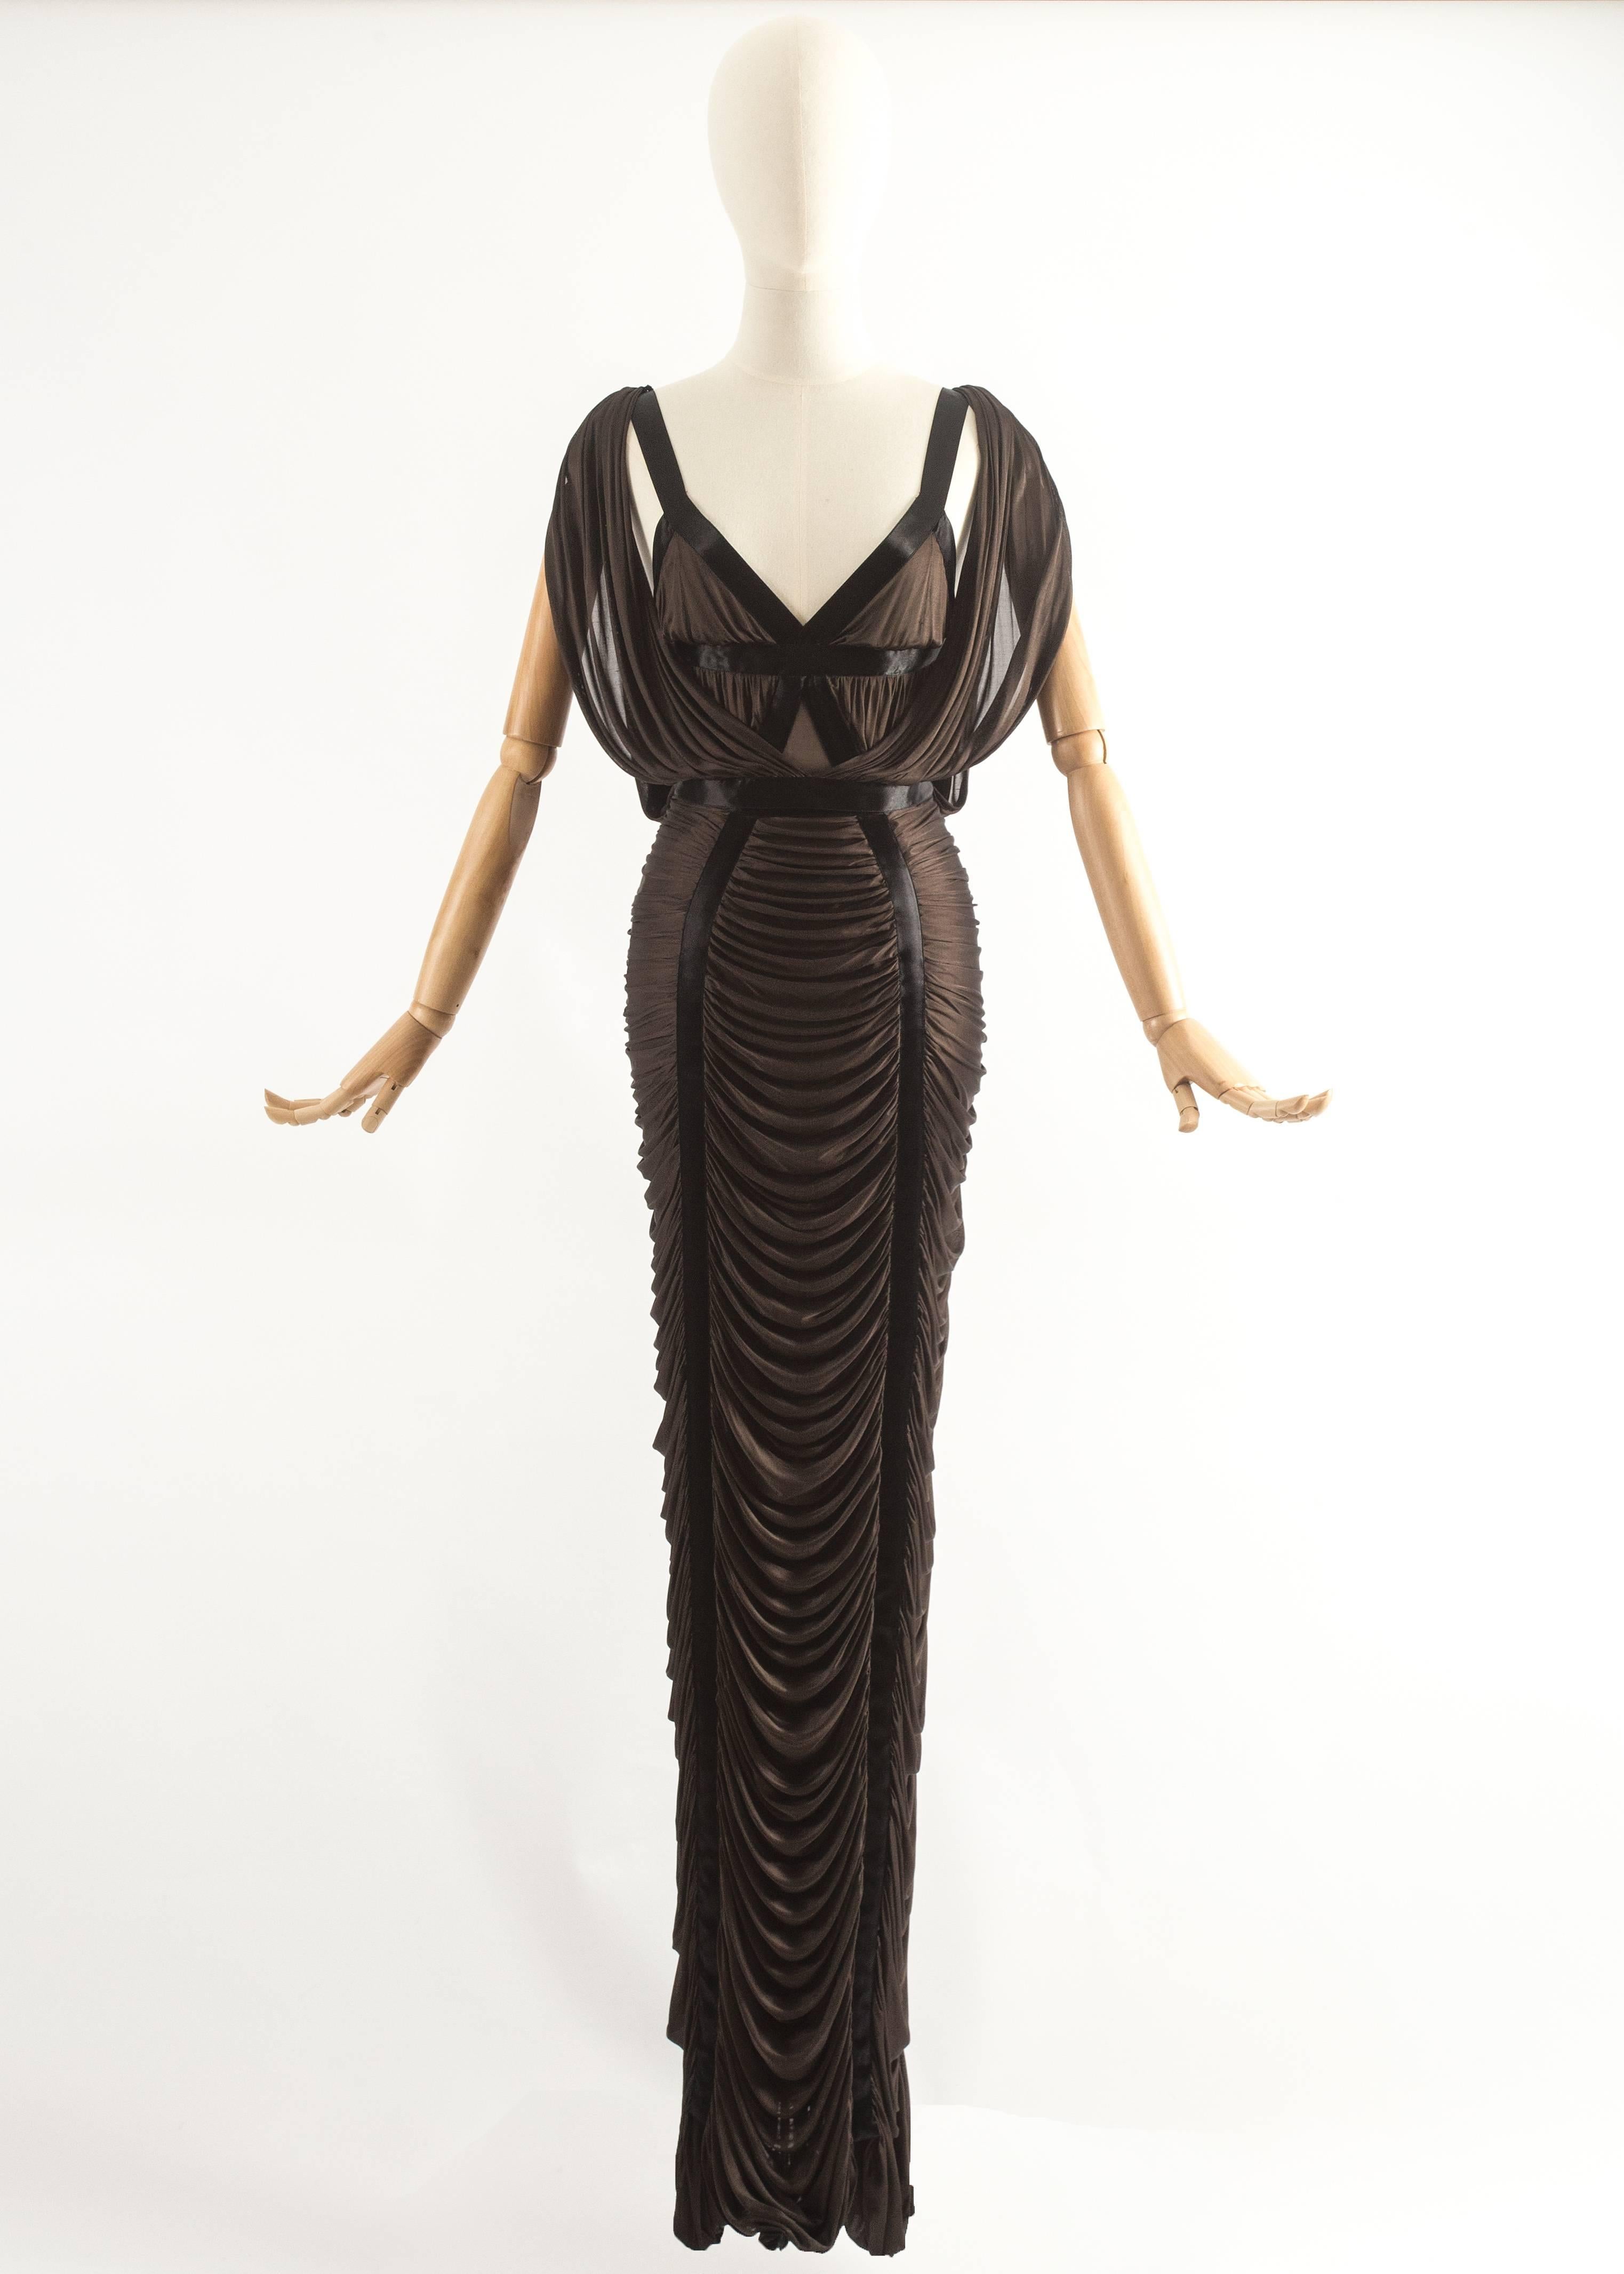 Tom Ford for Yves Saint Laurent Spring-Summer 2003 draped evening gown 